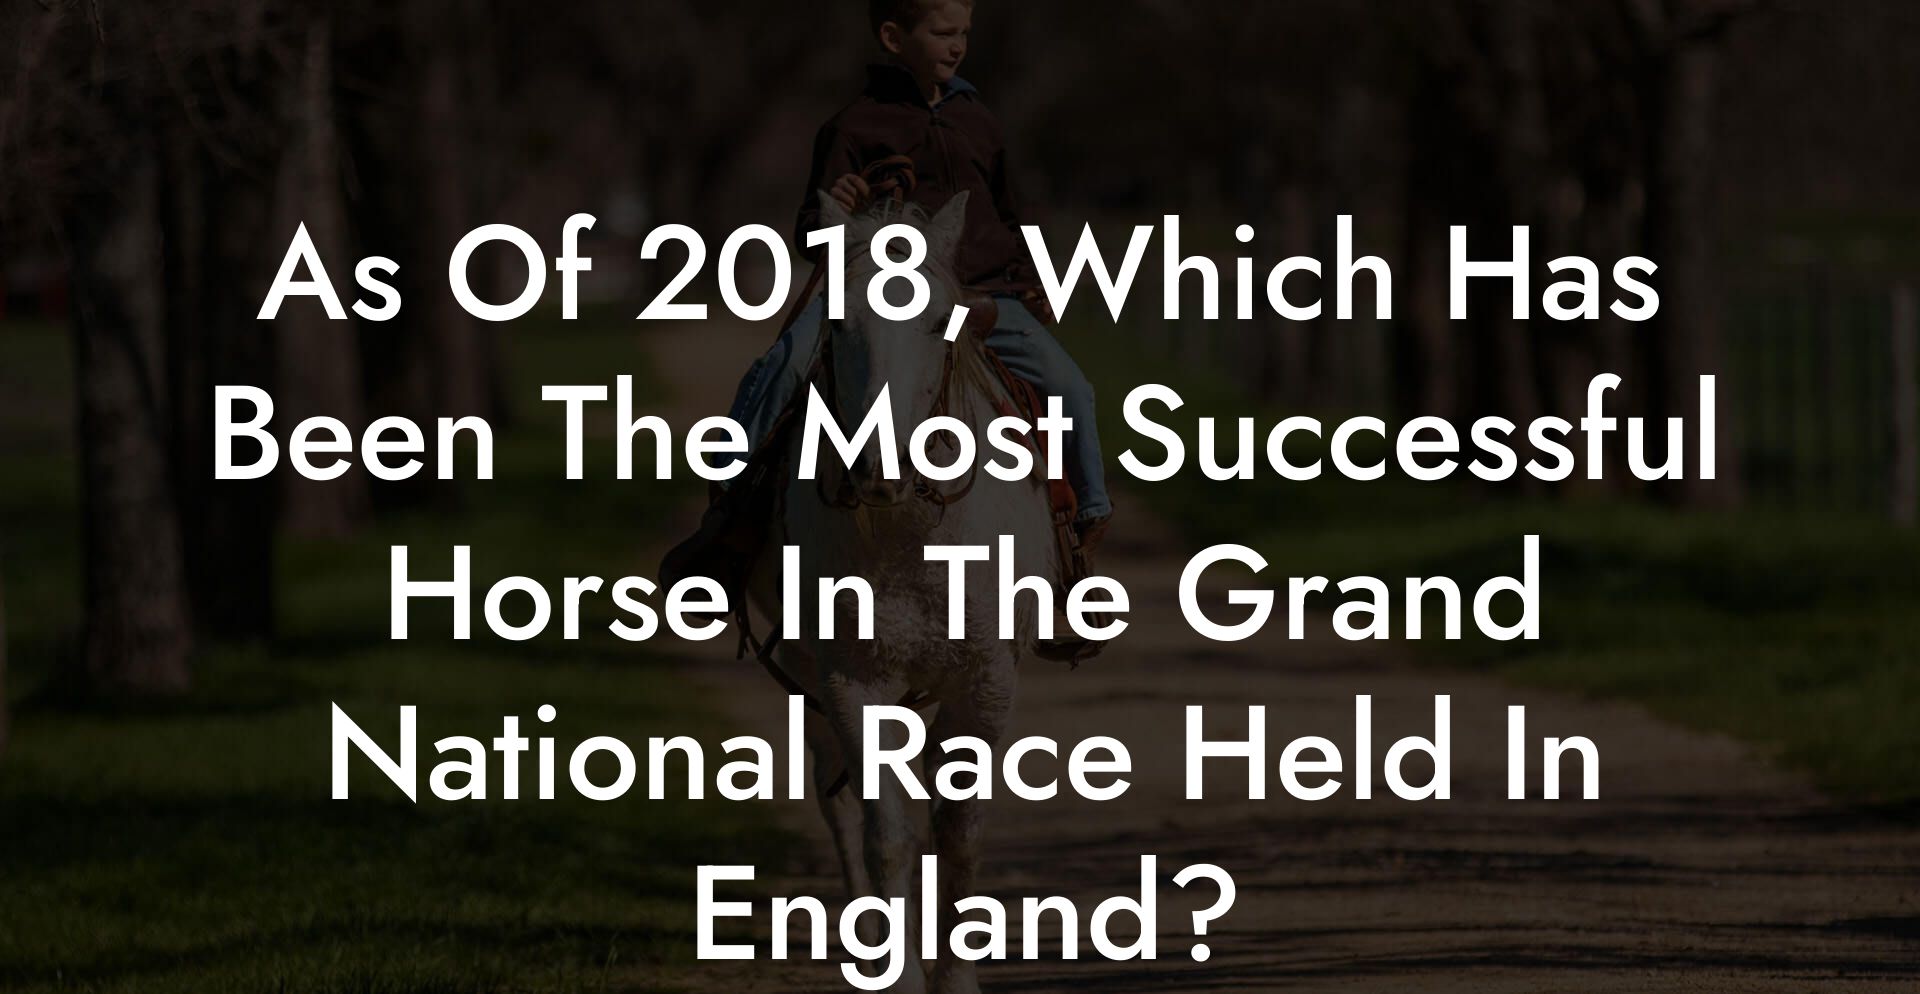 As Of 2018, Which Has Been The Most Successful Horse In The Grand National Race Held In England?